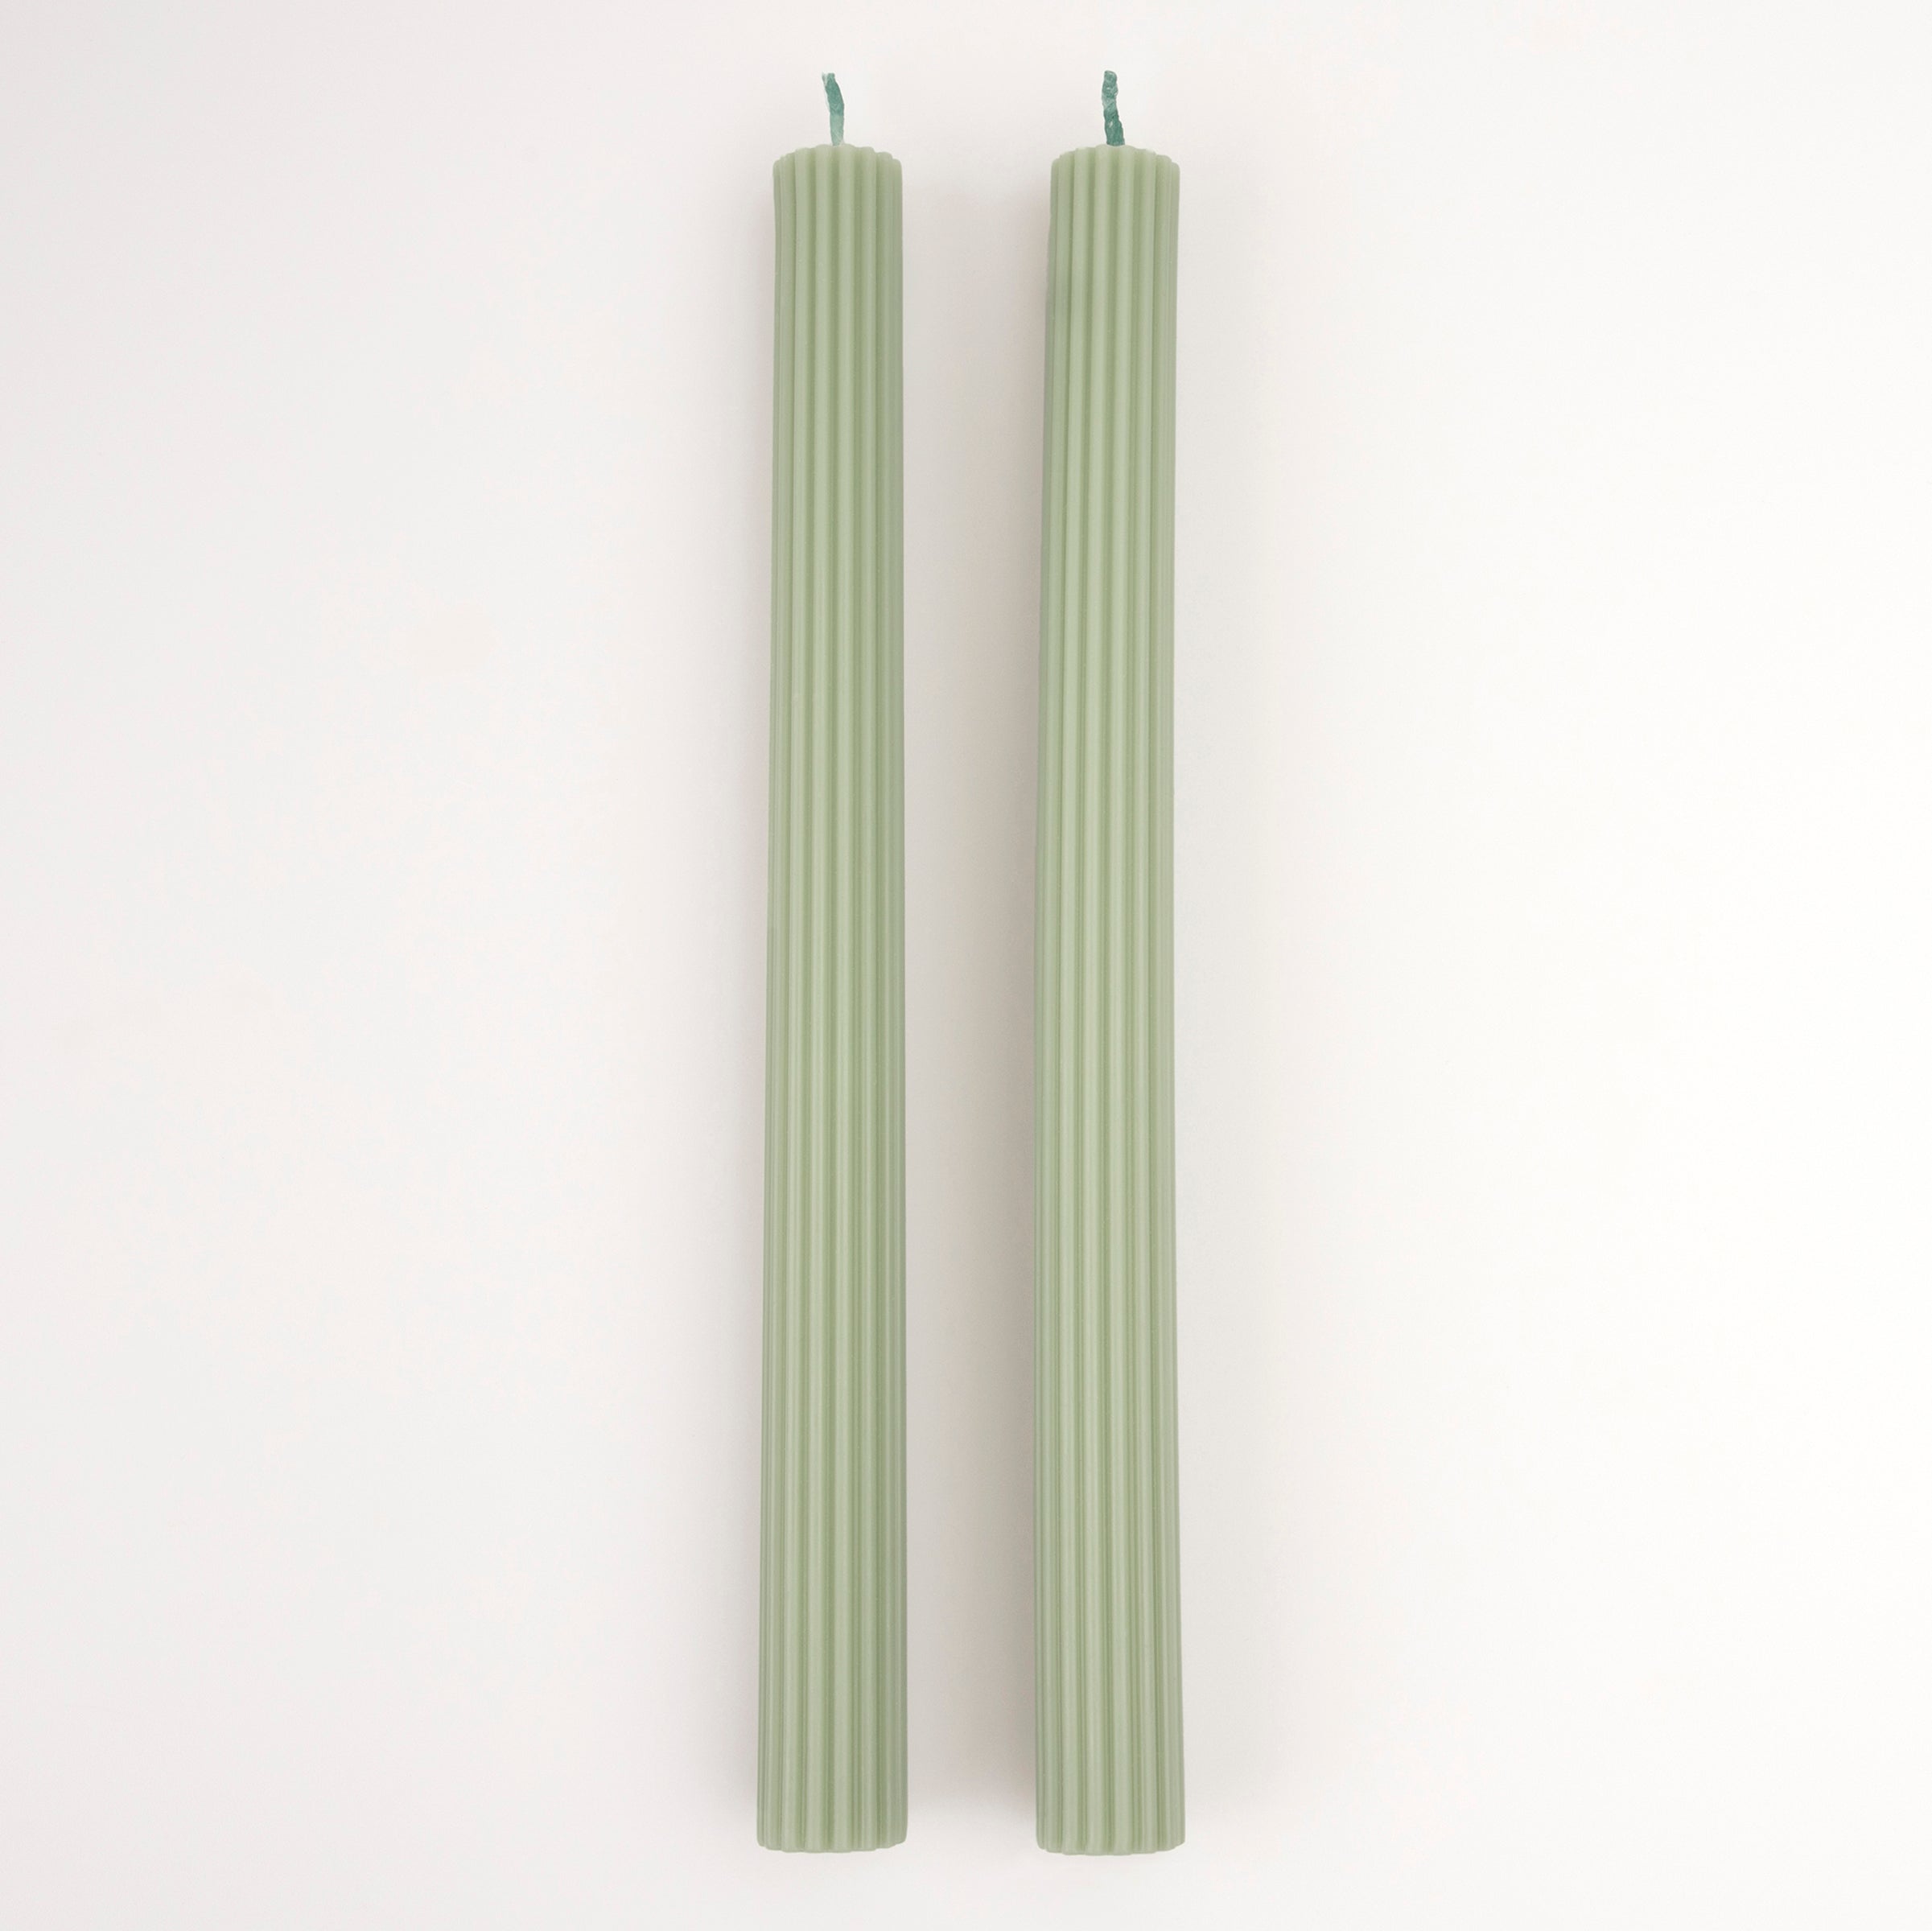 Our table candles, long with ridged details, are in a gorgeous green shade.